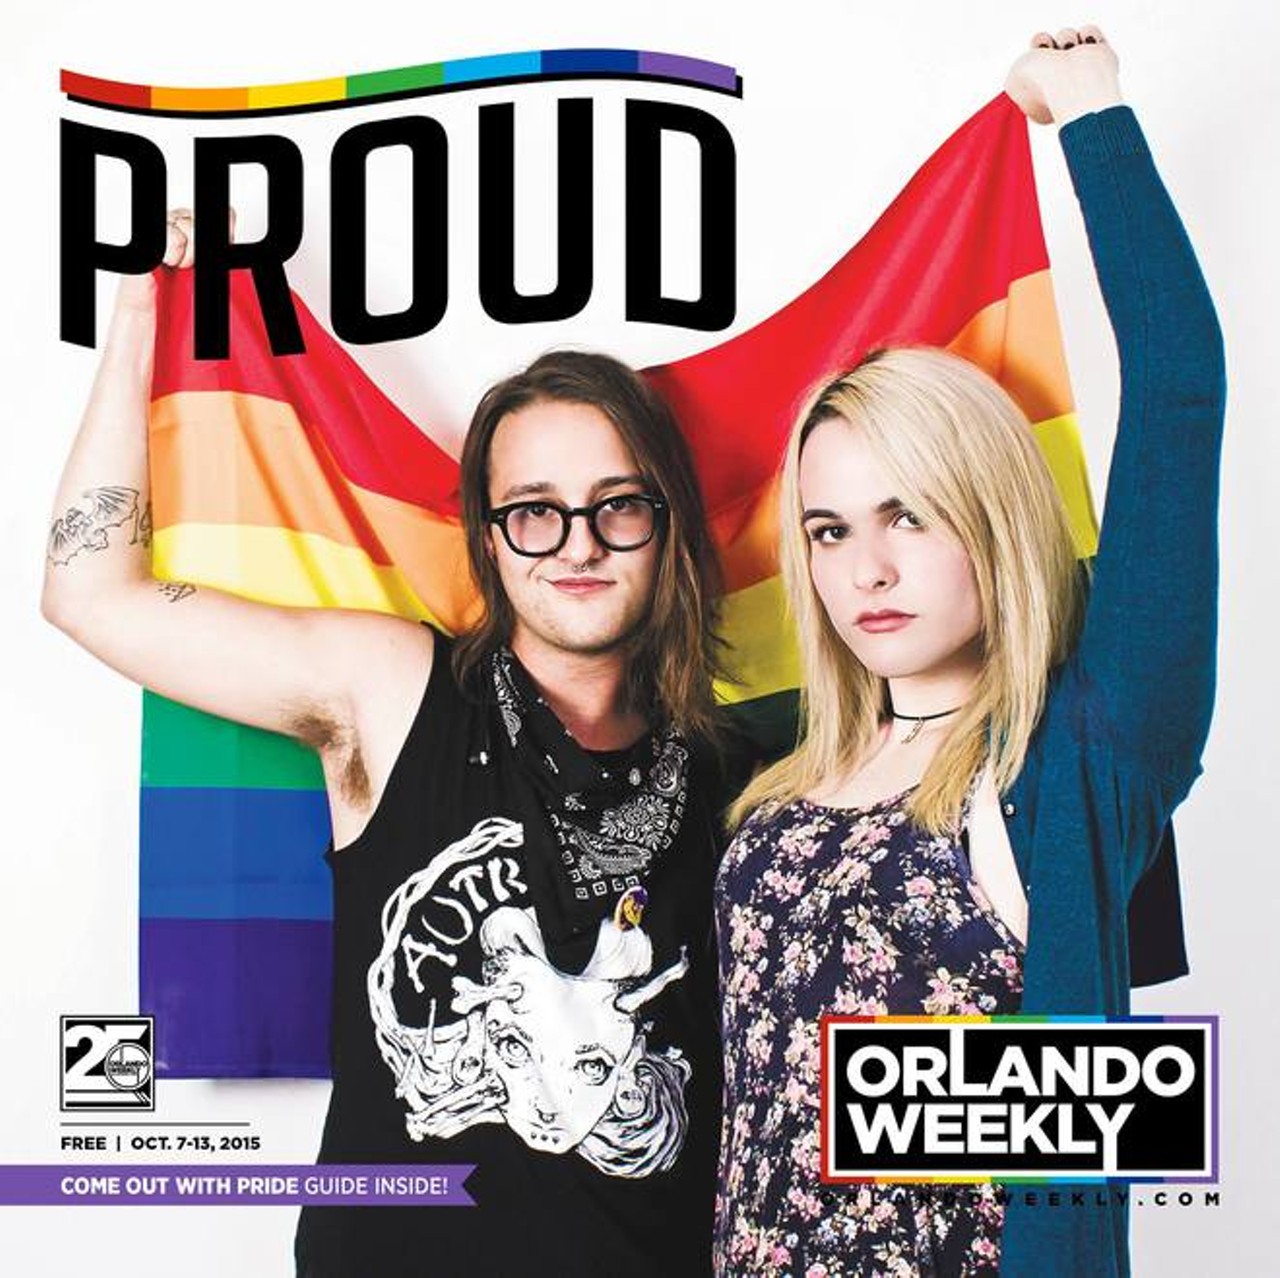 The Pride 2015 Issue
What can I say about trans community members Kaleb Alexander and Andie Tarkenton that isn&#146;t directly expressed in their faces on this cover? I&#146;ve never seen two people so nervously excited to be featured on the cover of a Pride Issue, and I just loved the end result. Easily one of the most memorable shoots of my time here at Orlando Weekly.